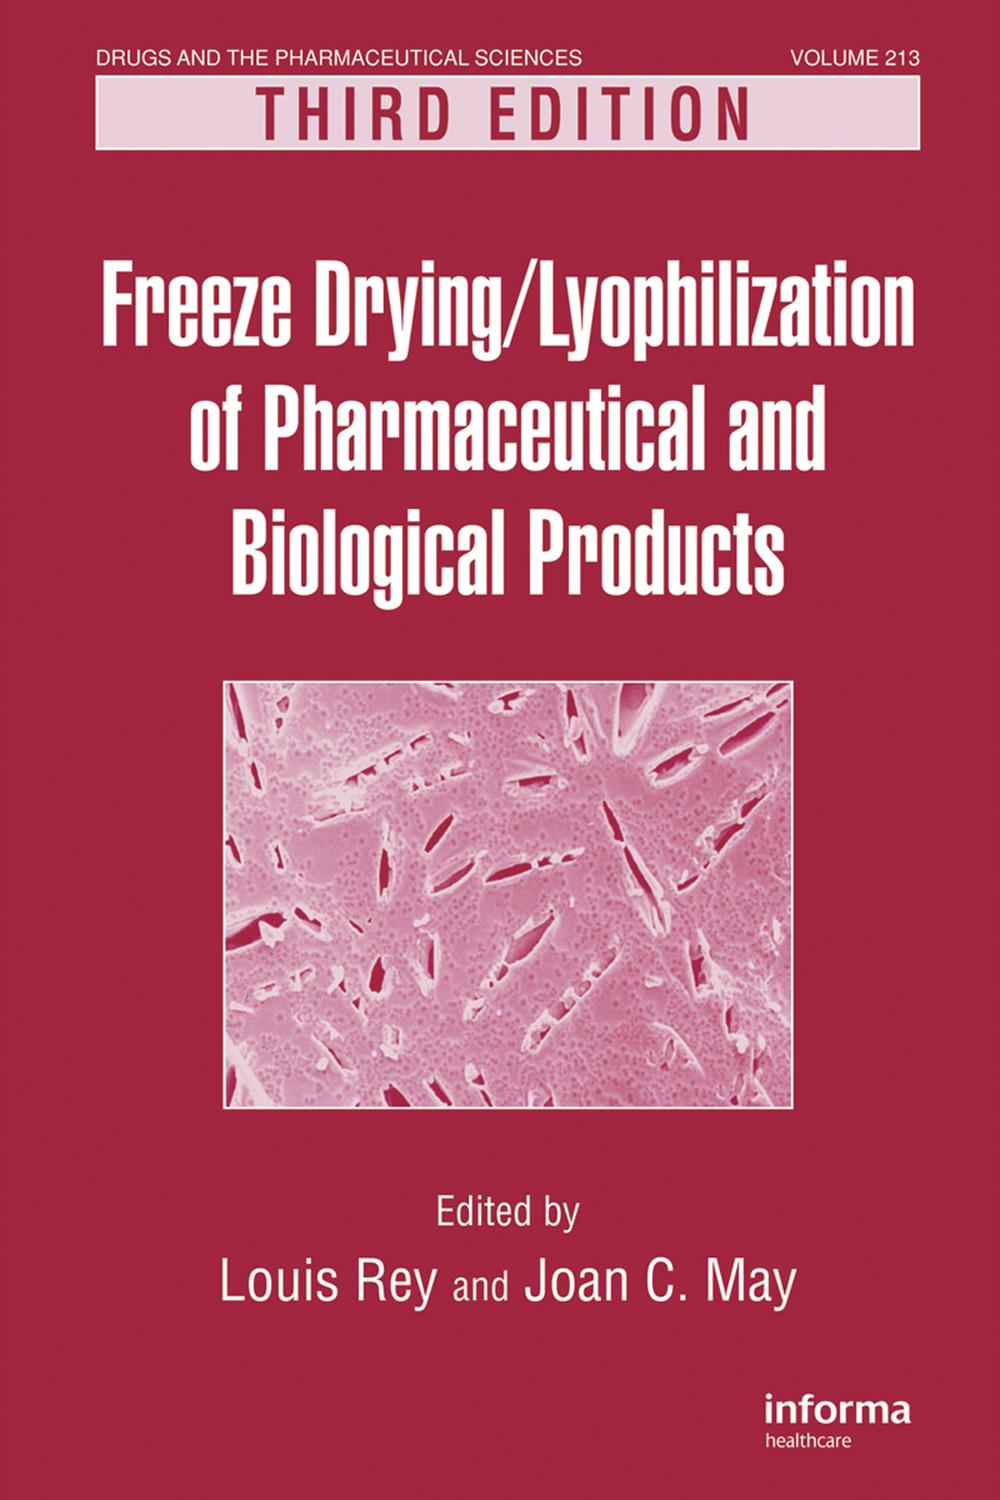 Freeze-Drying/Lyophilization of Pharmaceutical and Biological Products - Louis Rey